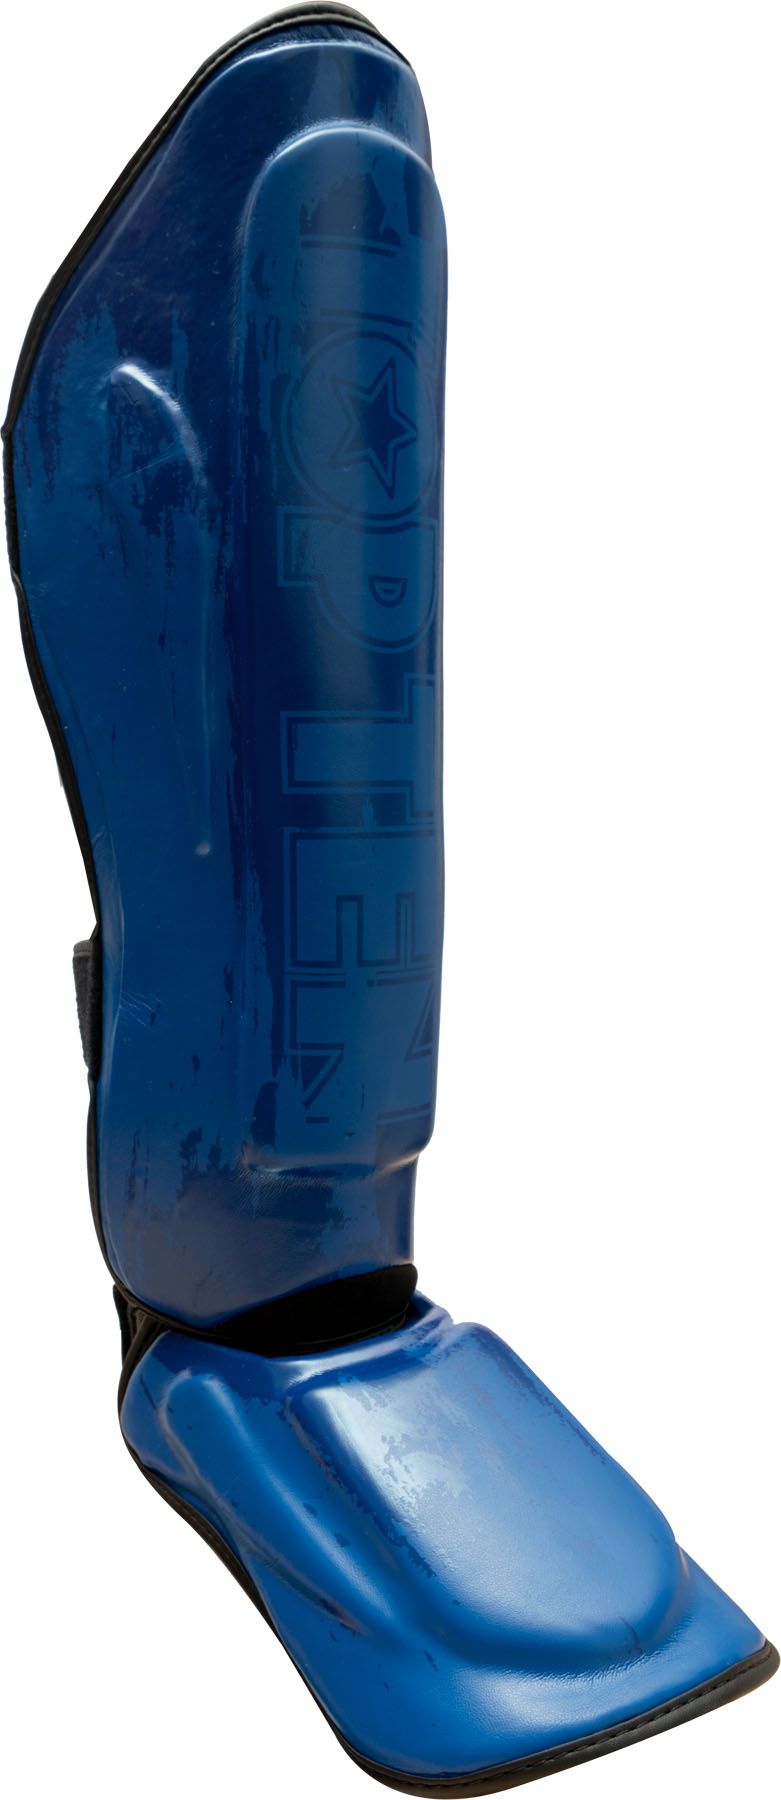 Top Ten Shin - and Instep Guard “Power Ink” - blue